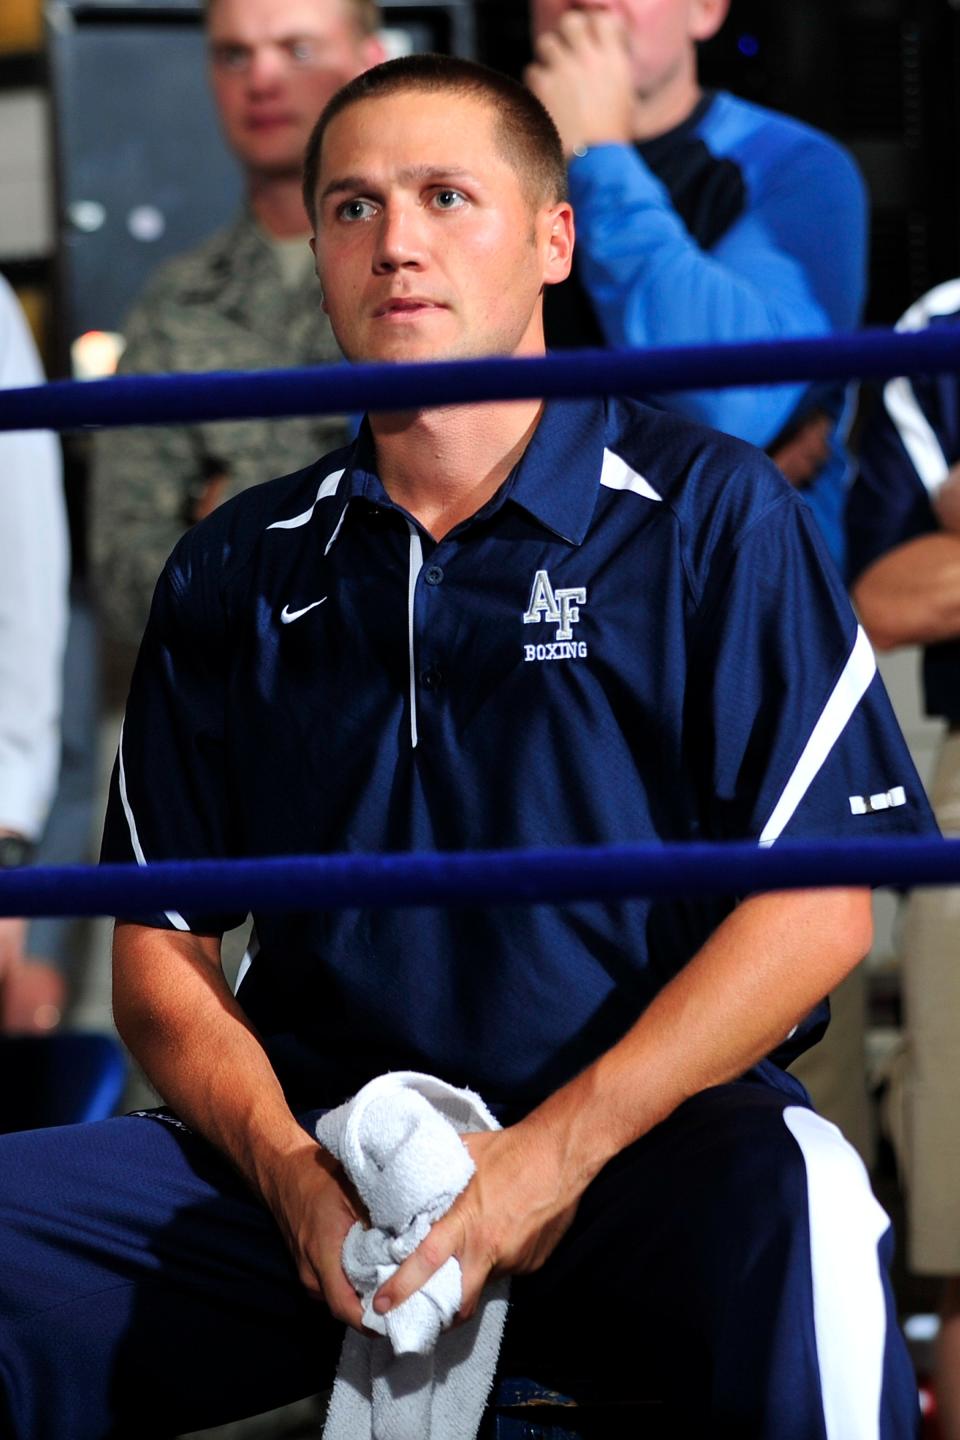 Peoria native Blake Baldi is head coach of the United States Air Force Academy boxing team, which won the national collegiate title on April 15, 2023.